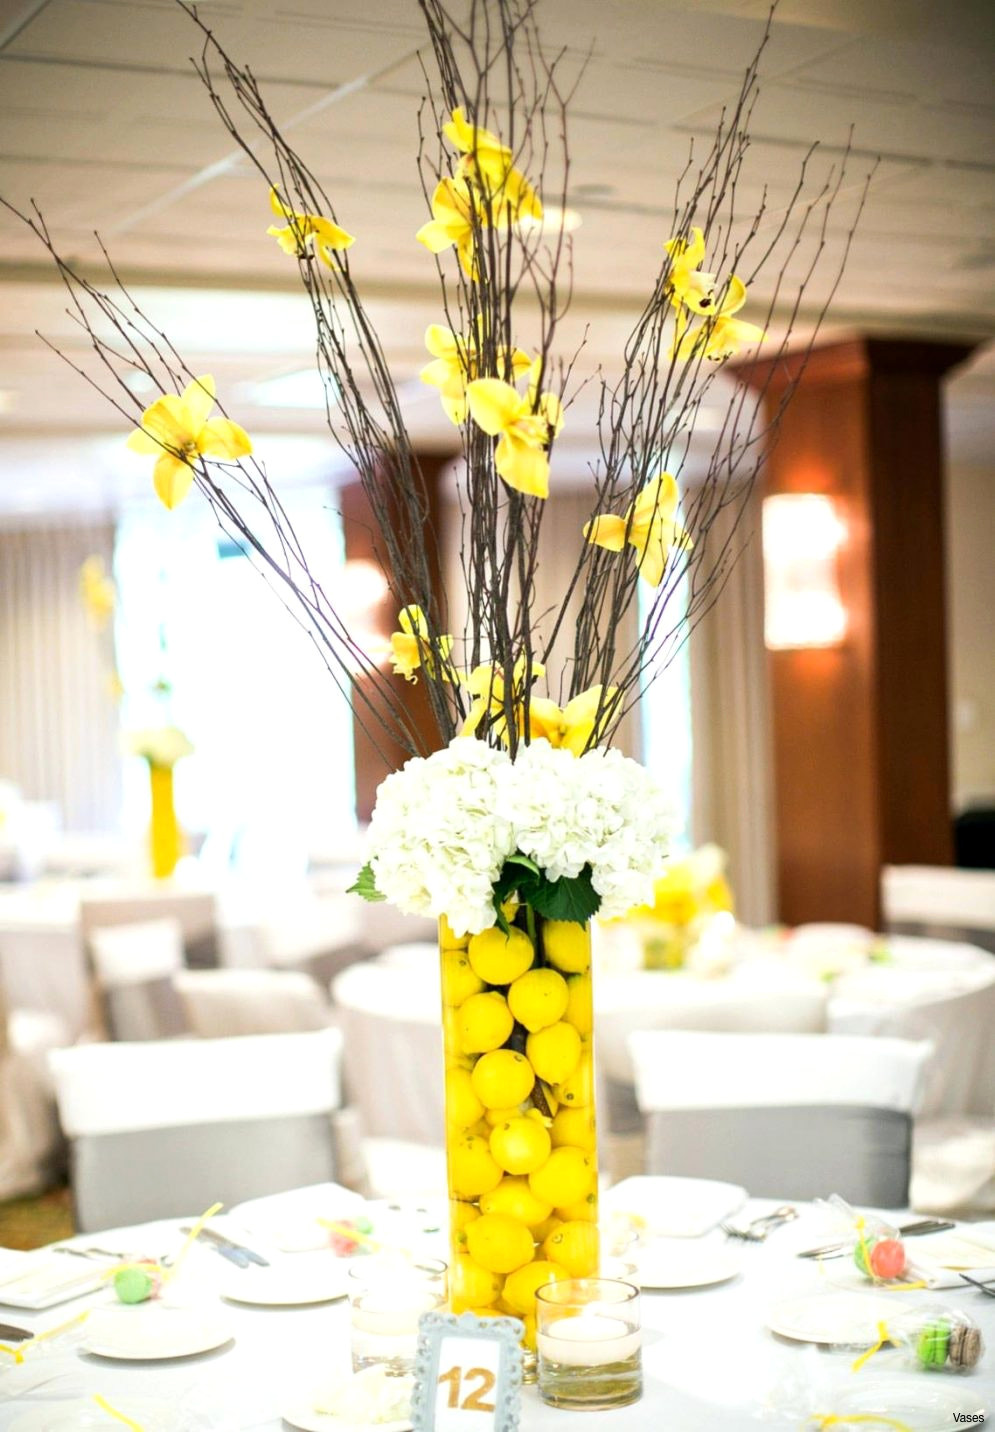 29 Fashionable Tall Vase Flower Arrangement Ideas 2024 free download tall vase flower arrangement ideas of decorations for weddings beautiful living room tall vase decor best with regard to decorations for weddings fresh diy home decor vaseh vases decorative 